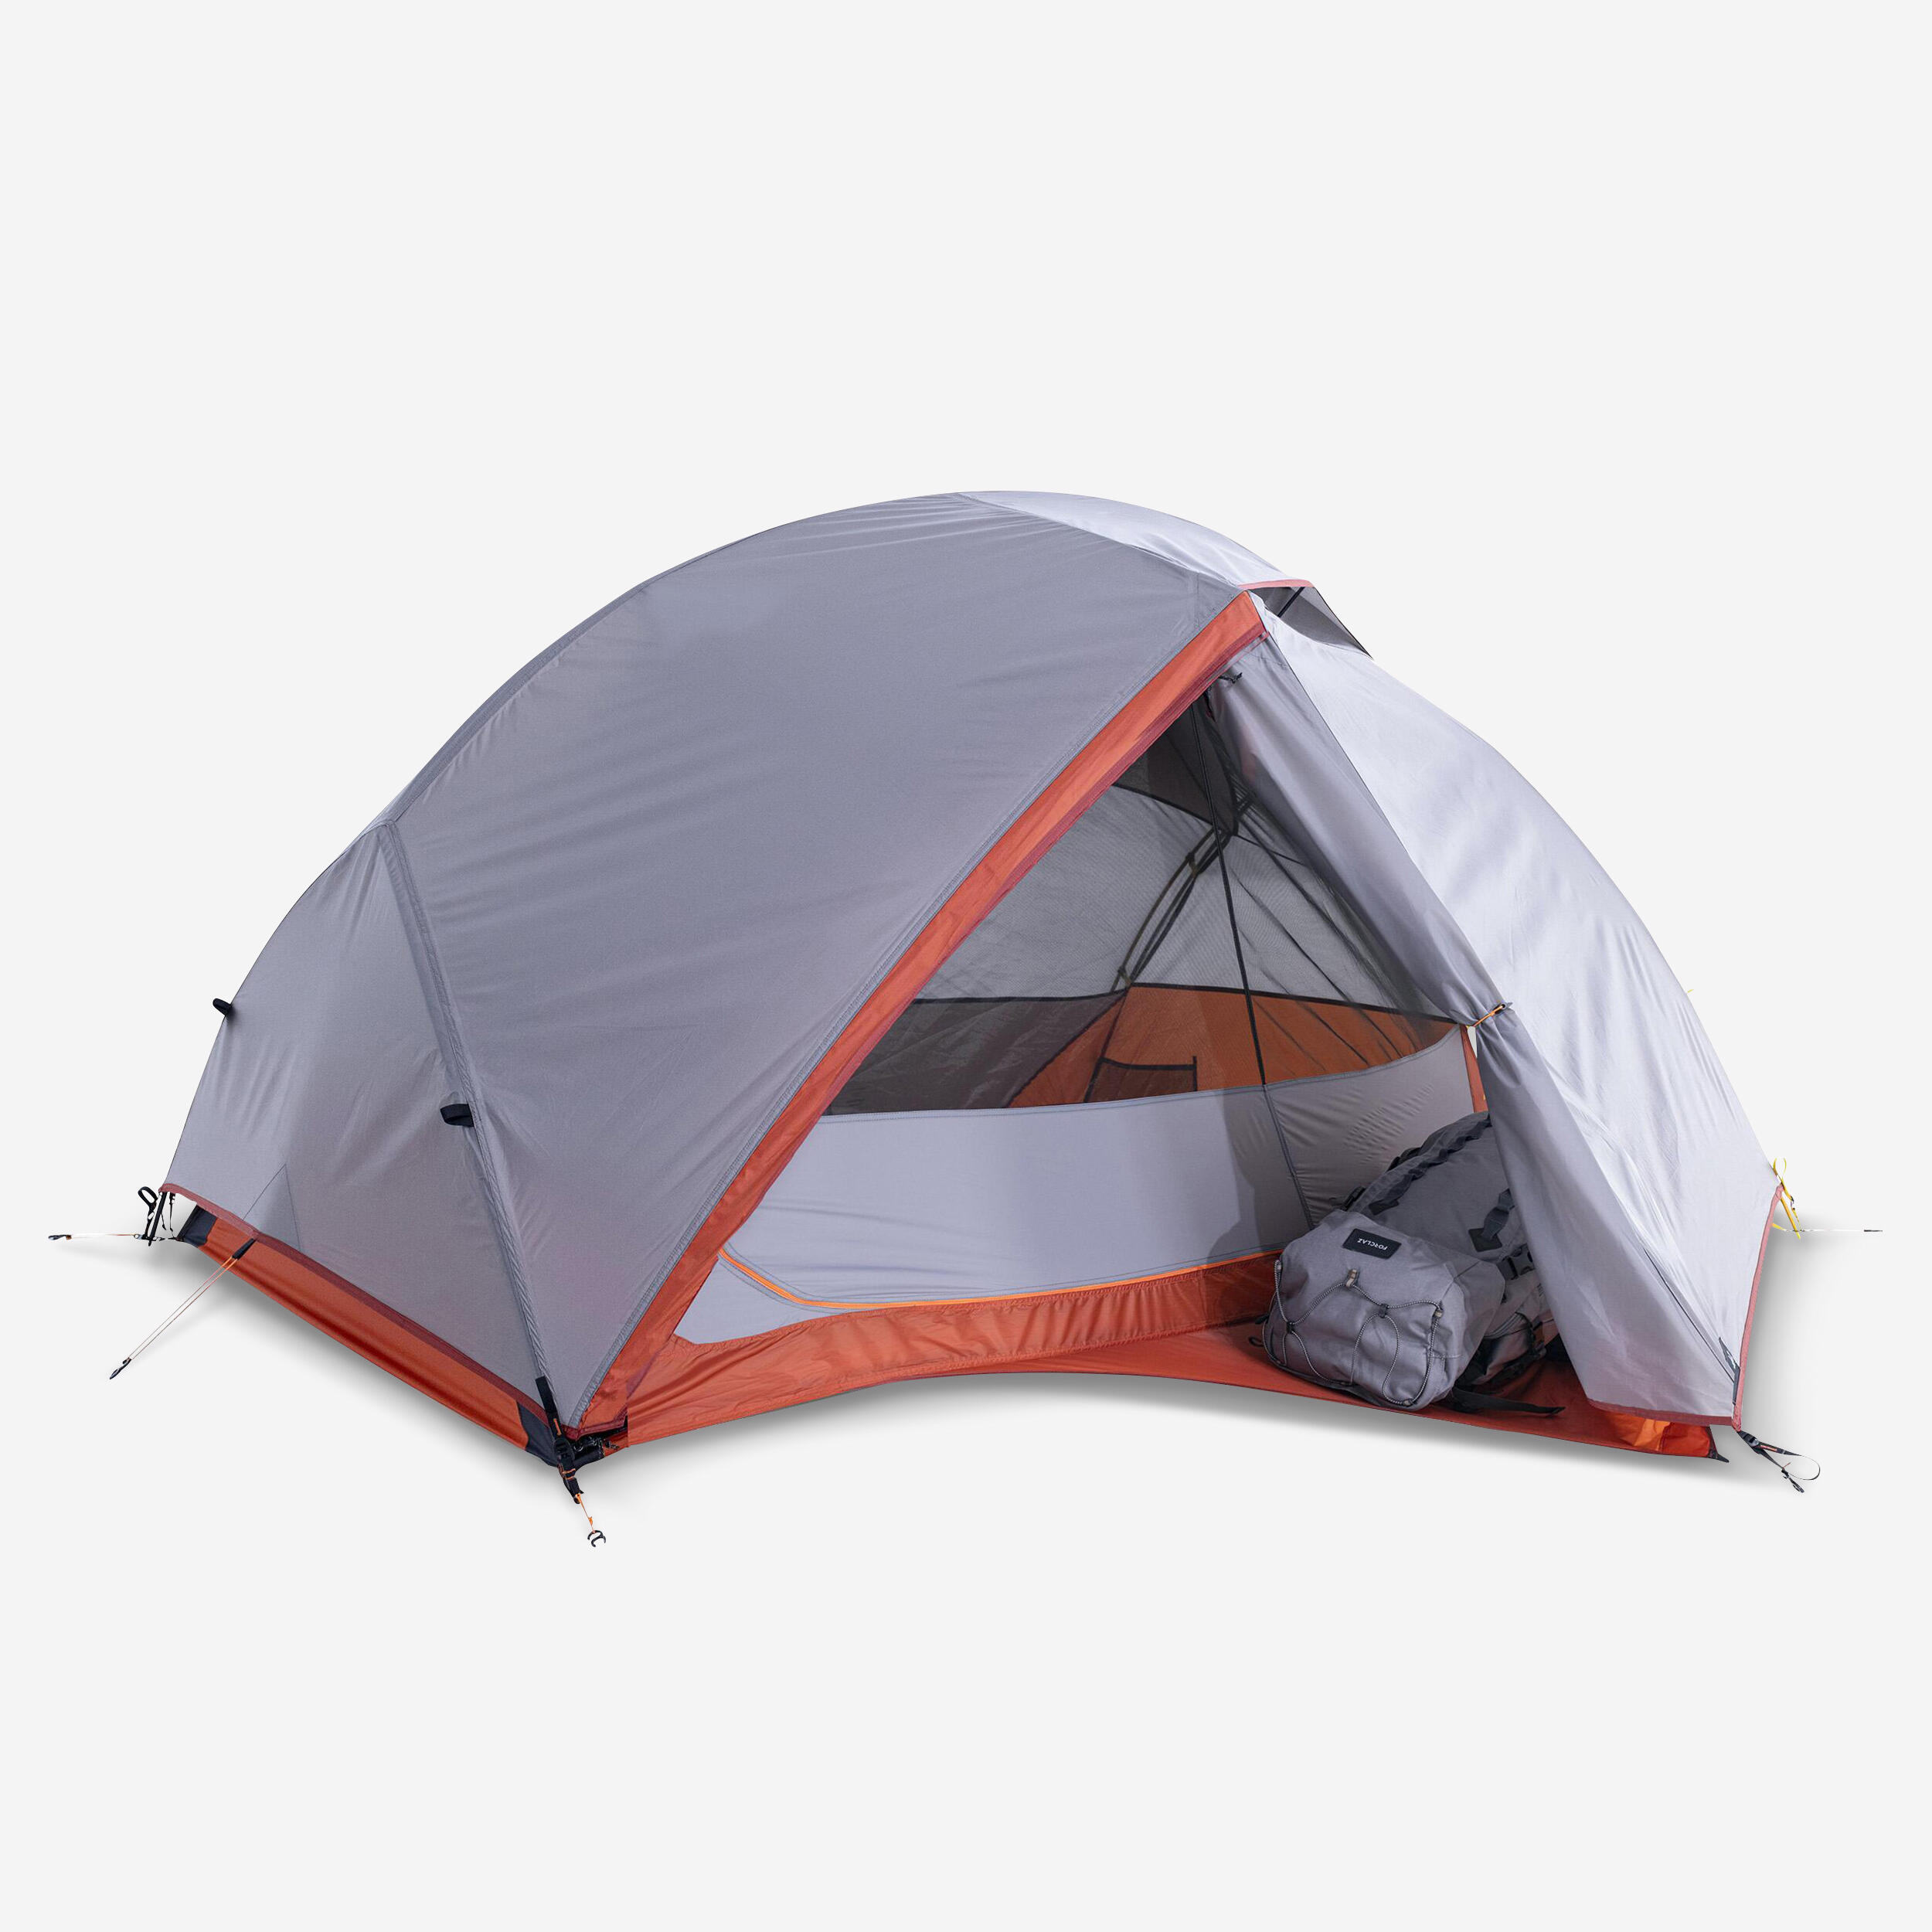 Trekking dome tent - 2-p - MT900 - One Size By FORCLAZ | Decathlon